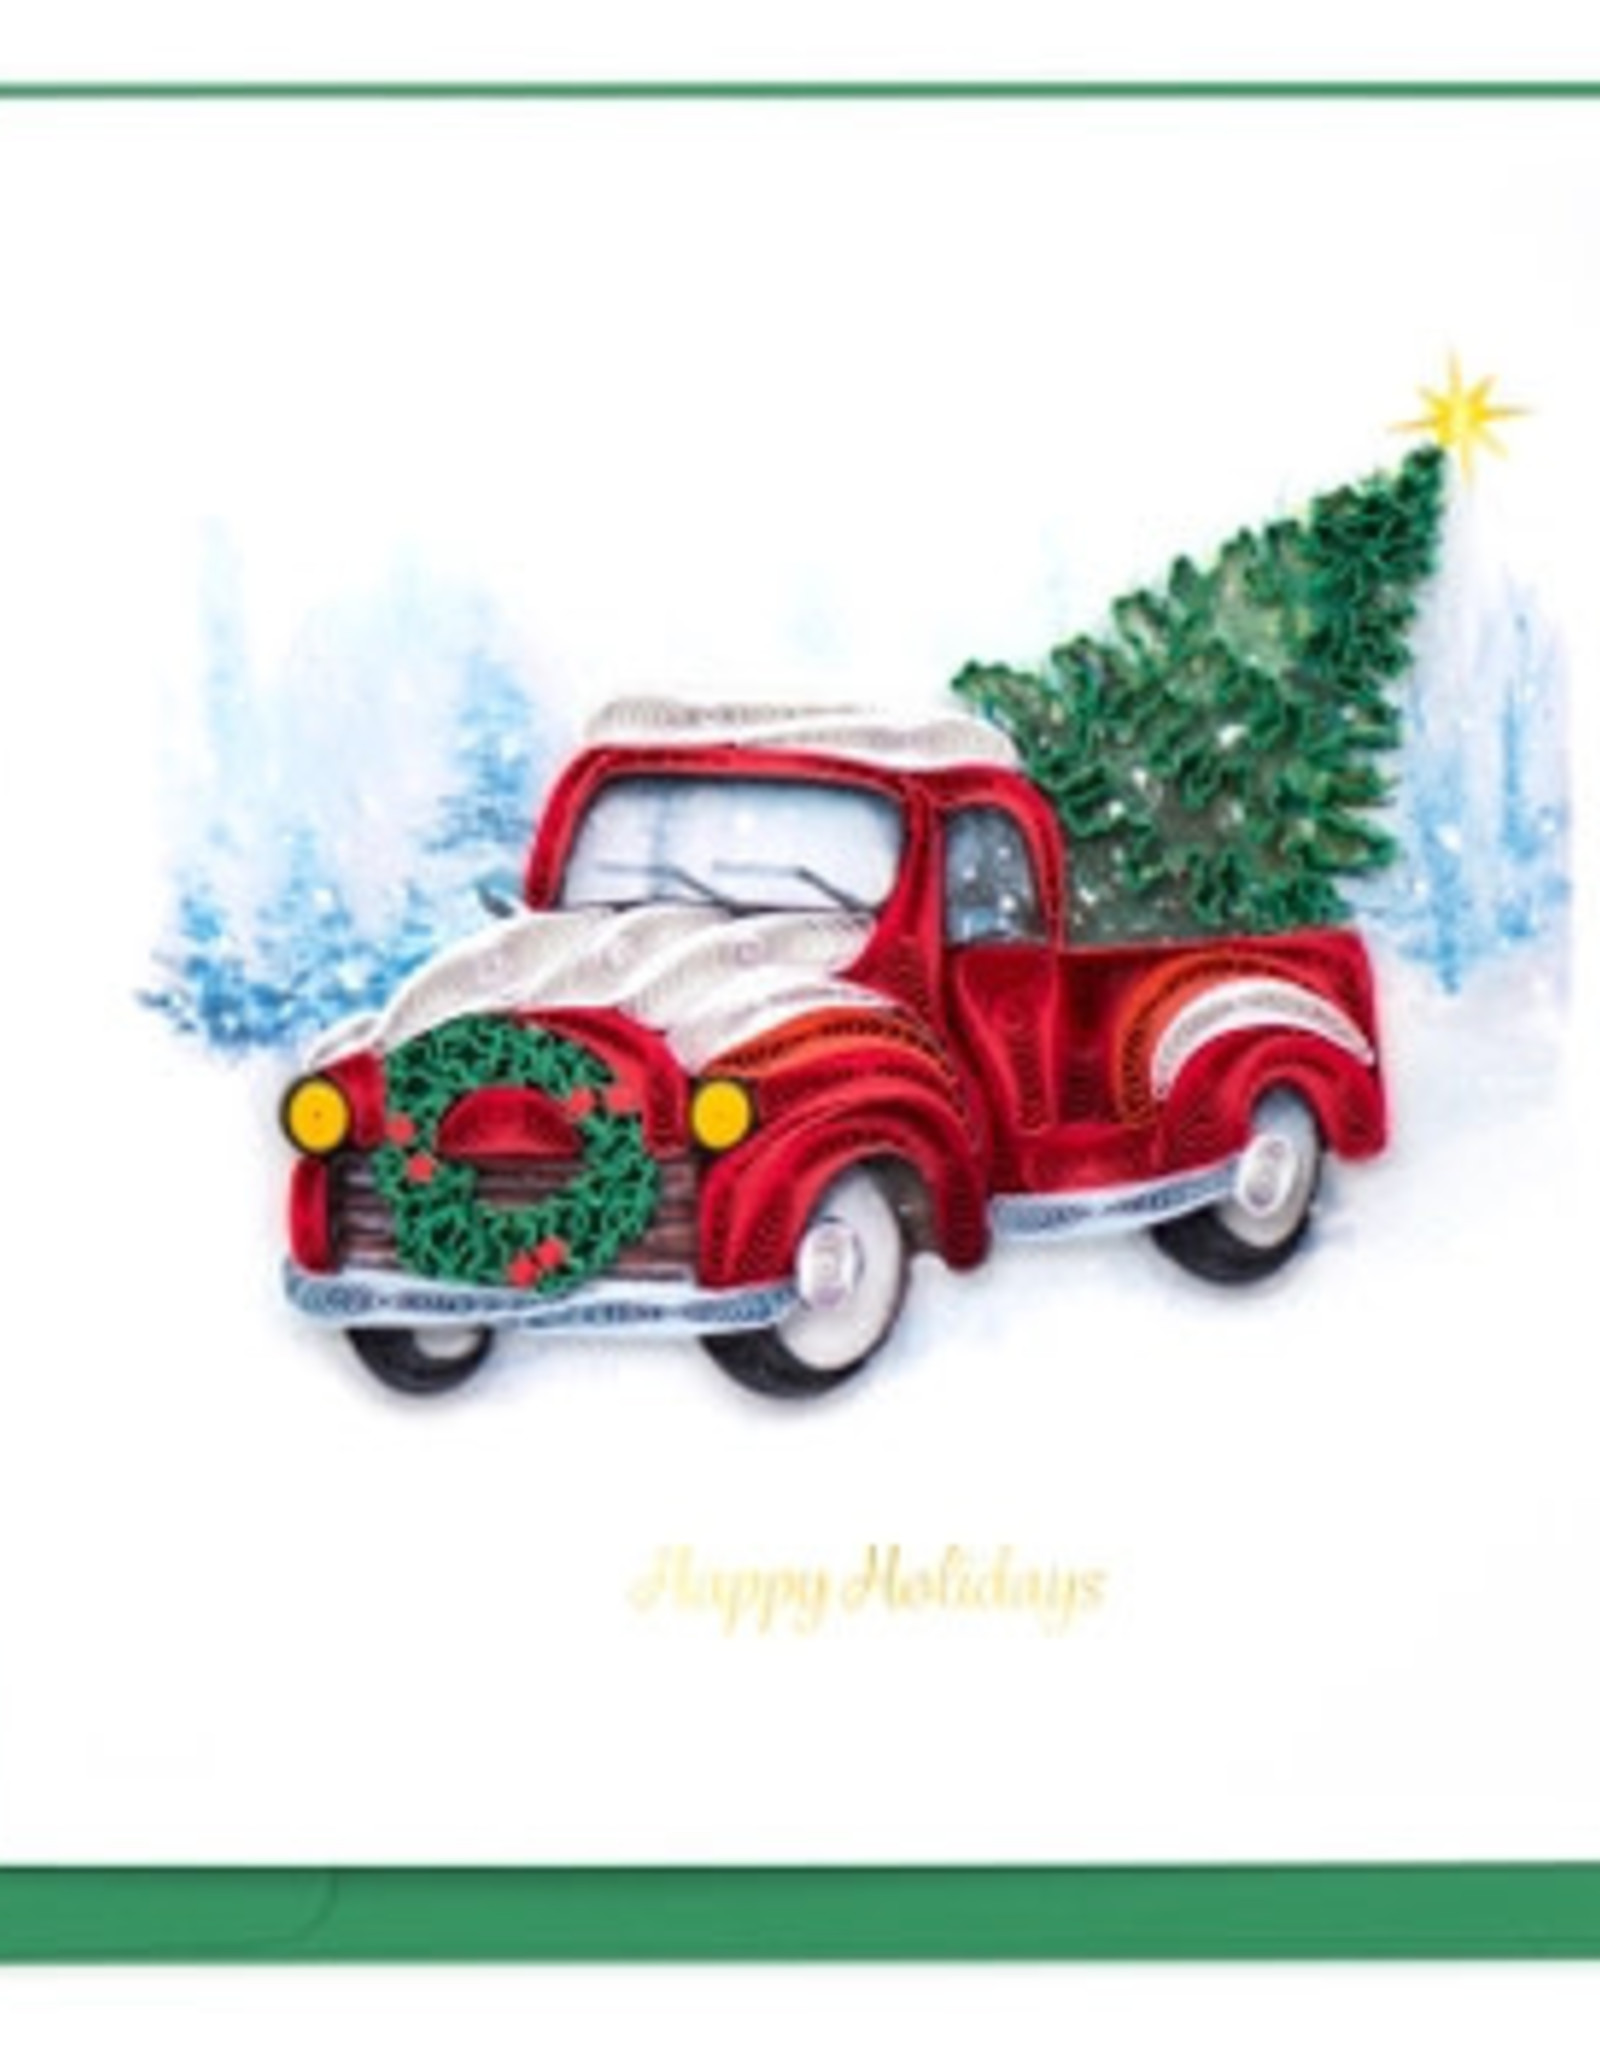 Quilling Card Quilled Christmas Truck Card